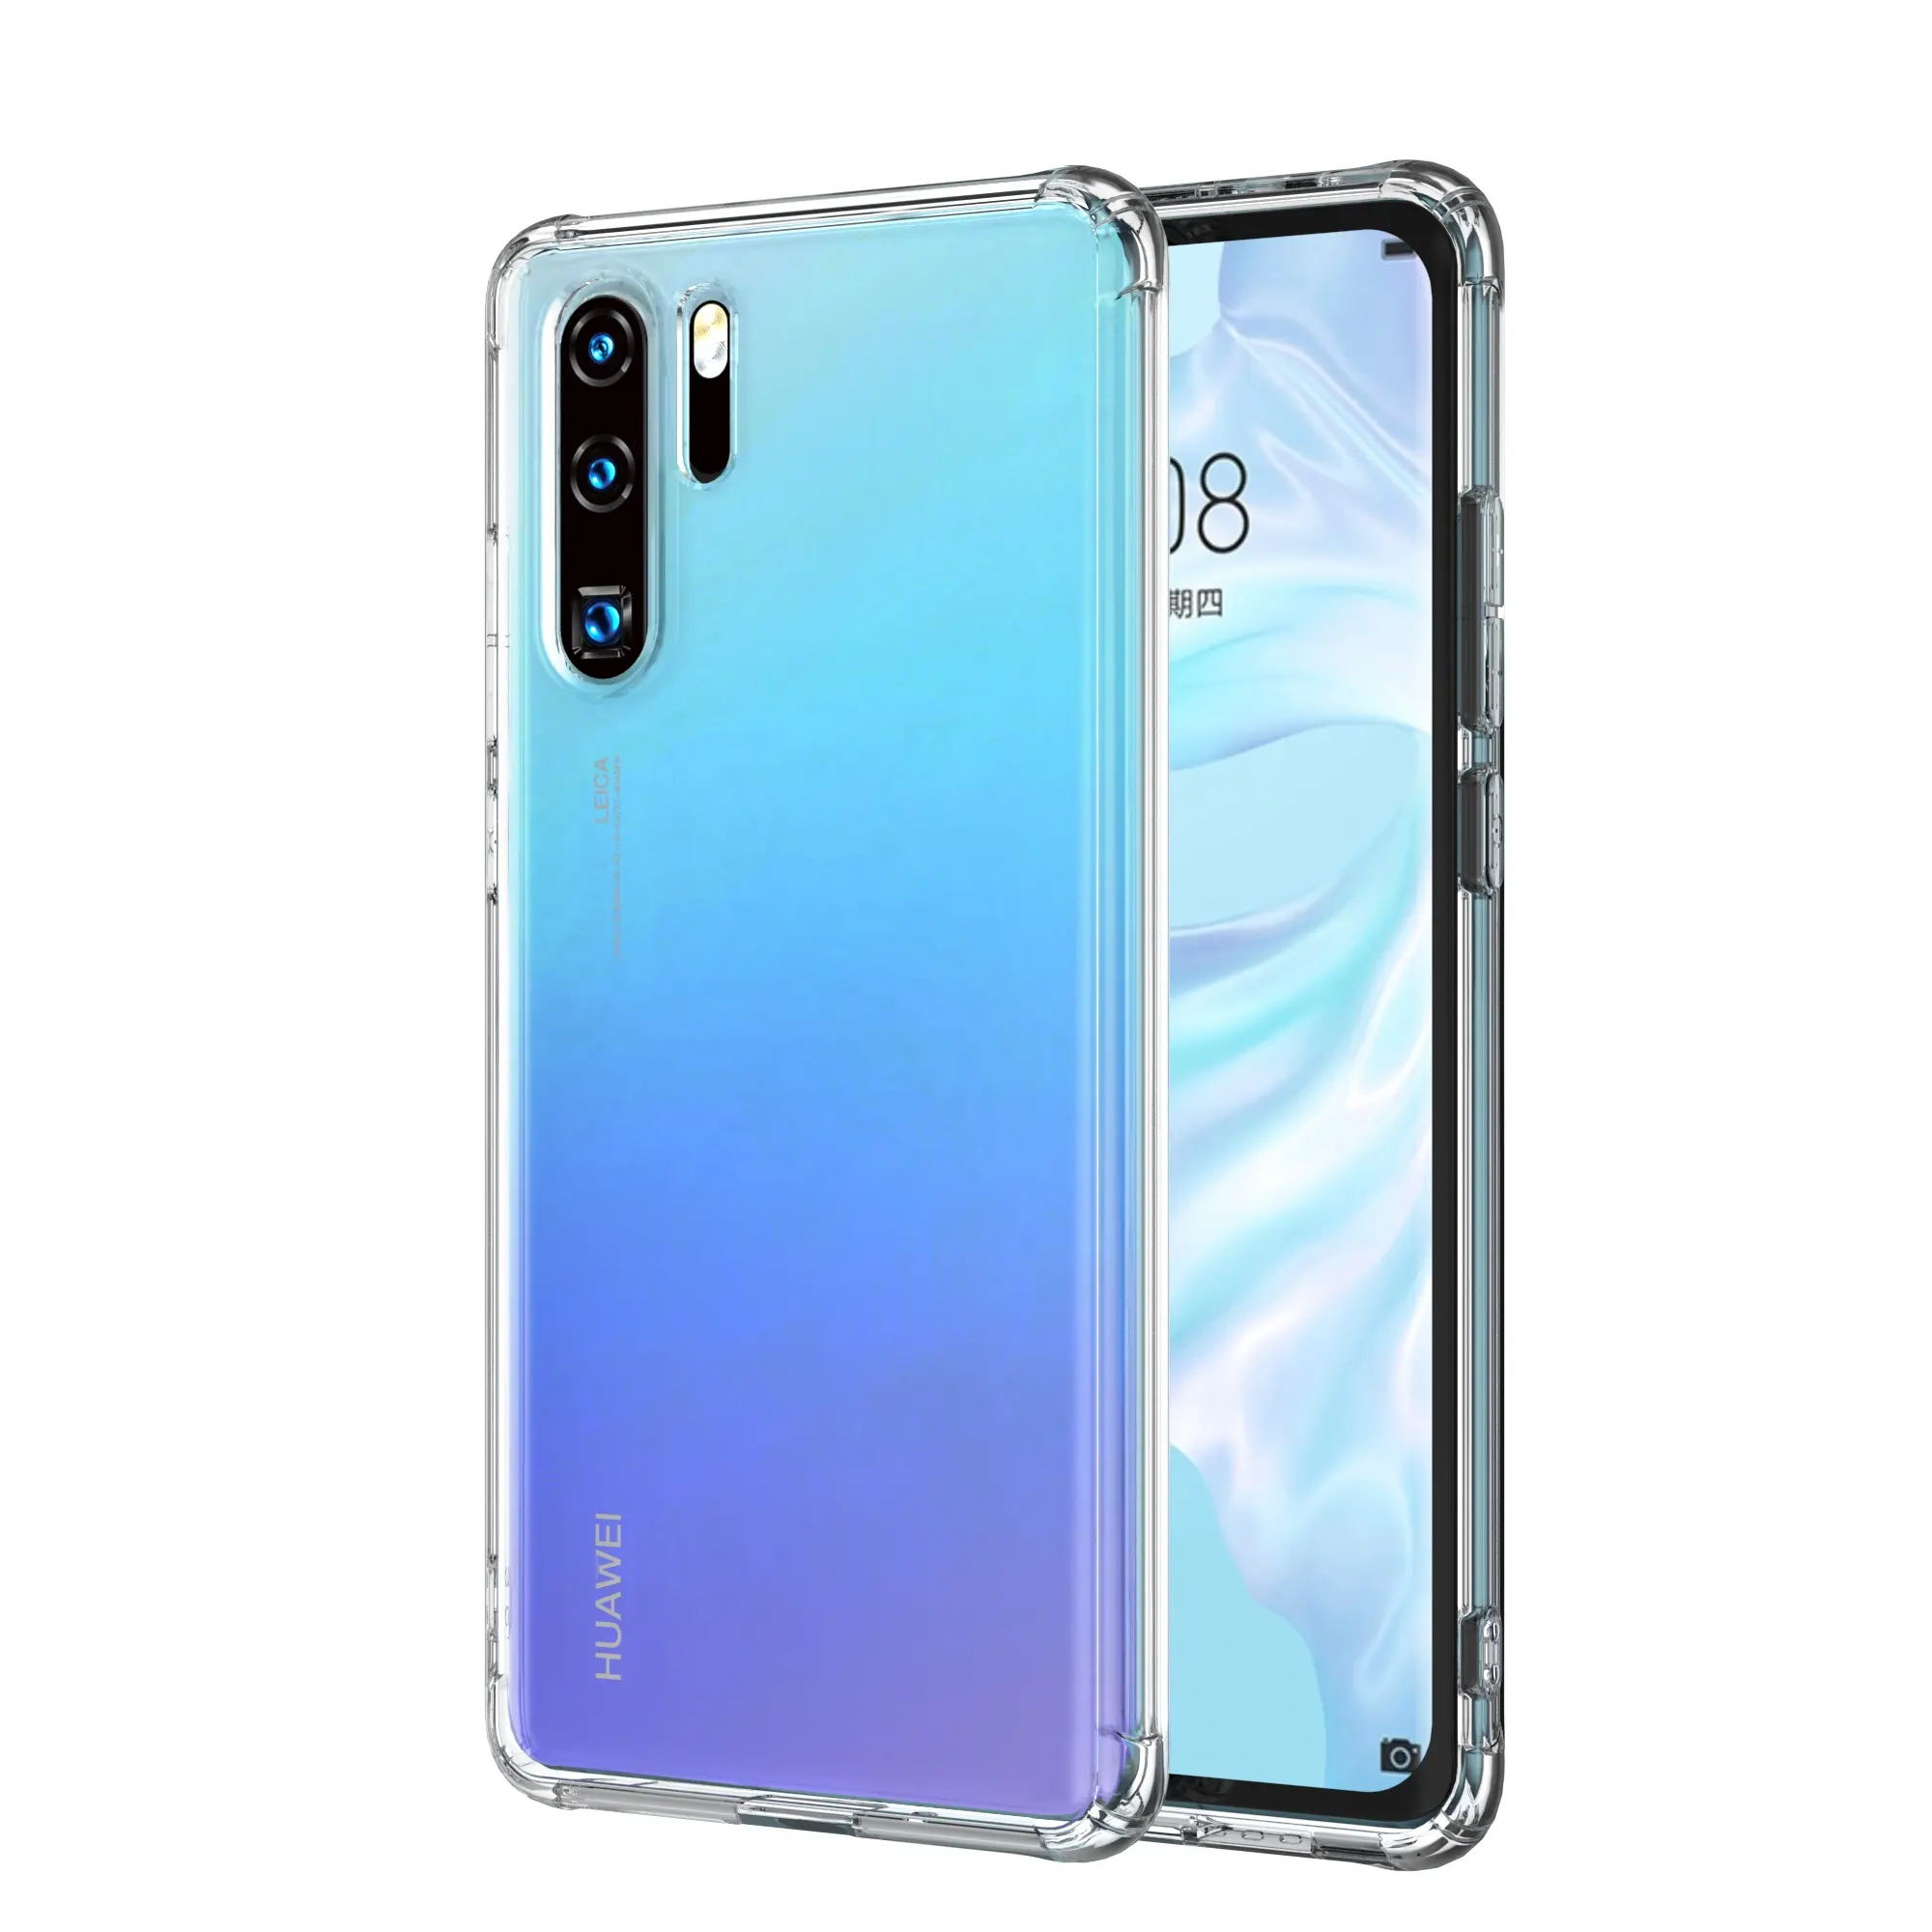 For Huawei P30 Case Hybrid Shockproof Silicone TPU Back Cover Phone Case For Huawei P30 Lite P20 Mate 20 Pro